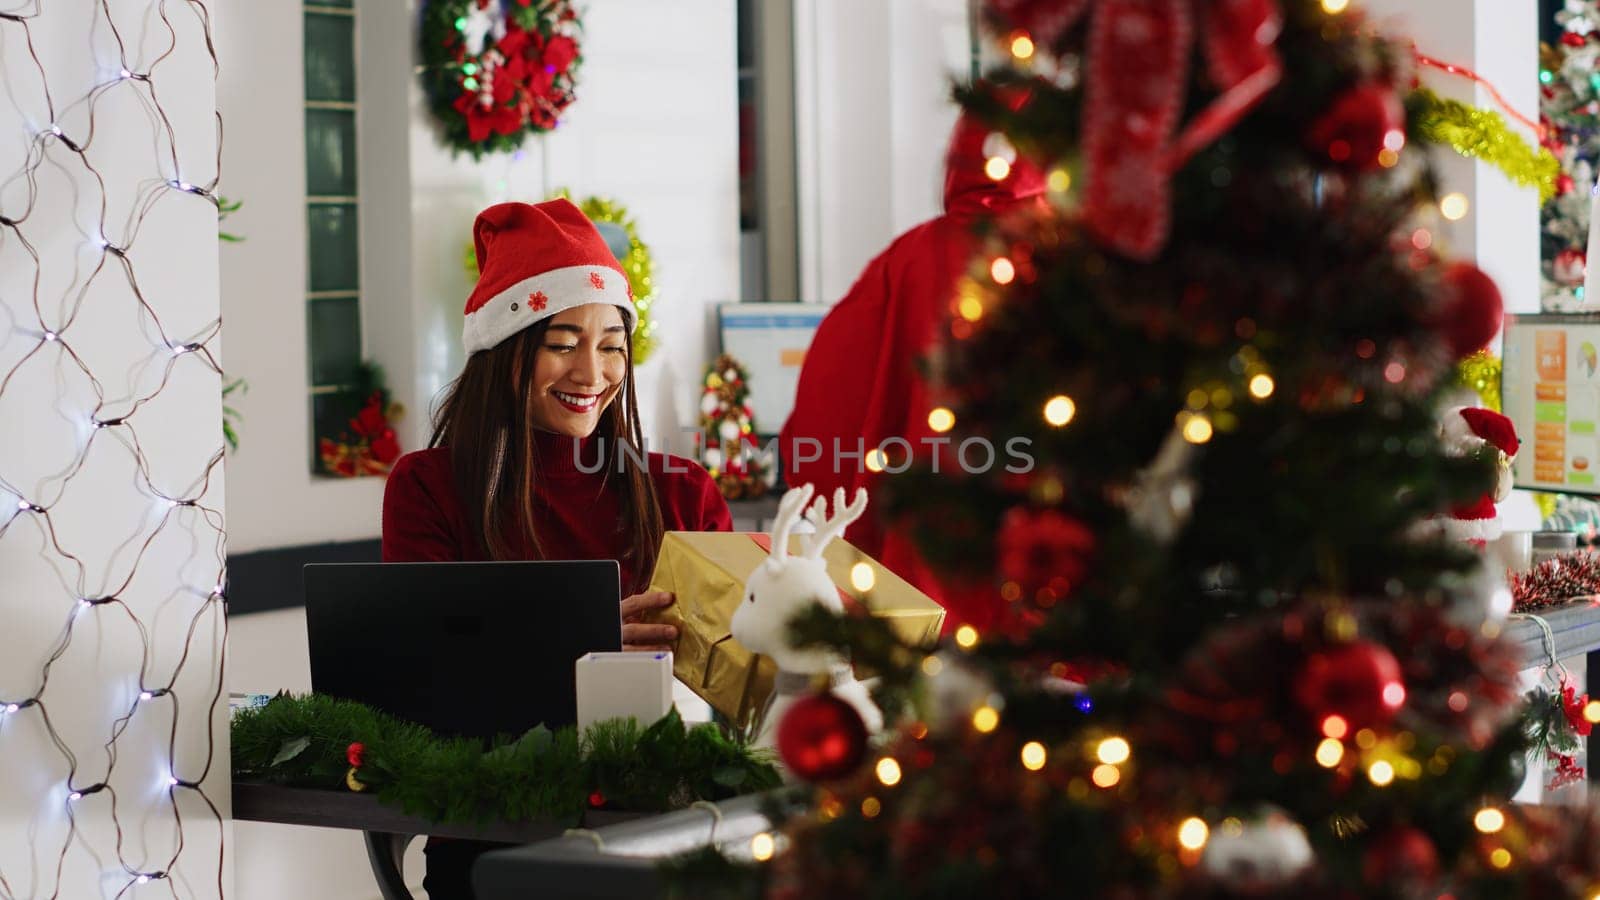 Asian worker receiving gifts from generous colleague acting as Santa in xmas decorated office. Employee wearing festive costume surprising coworkers with presents during winter holiday season